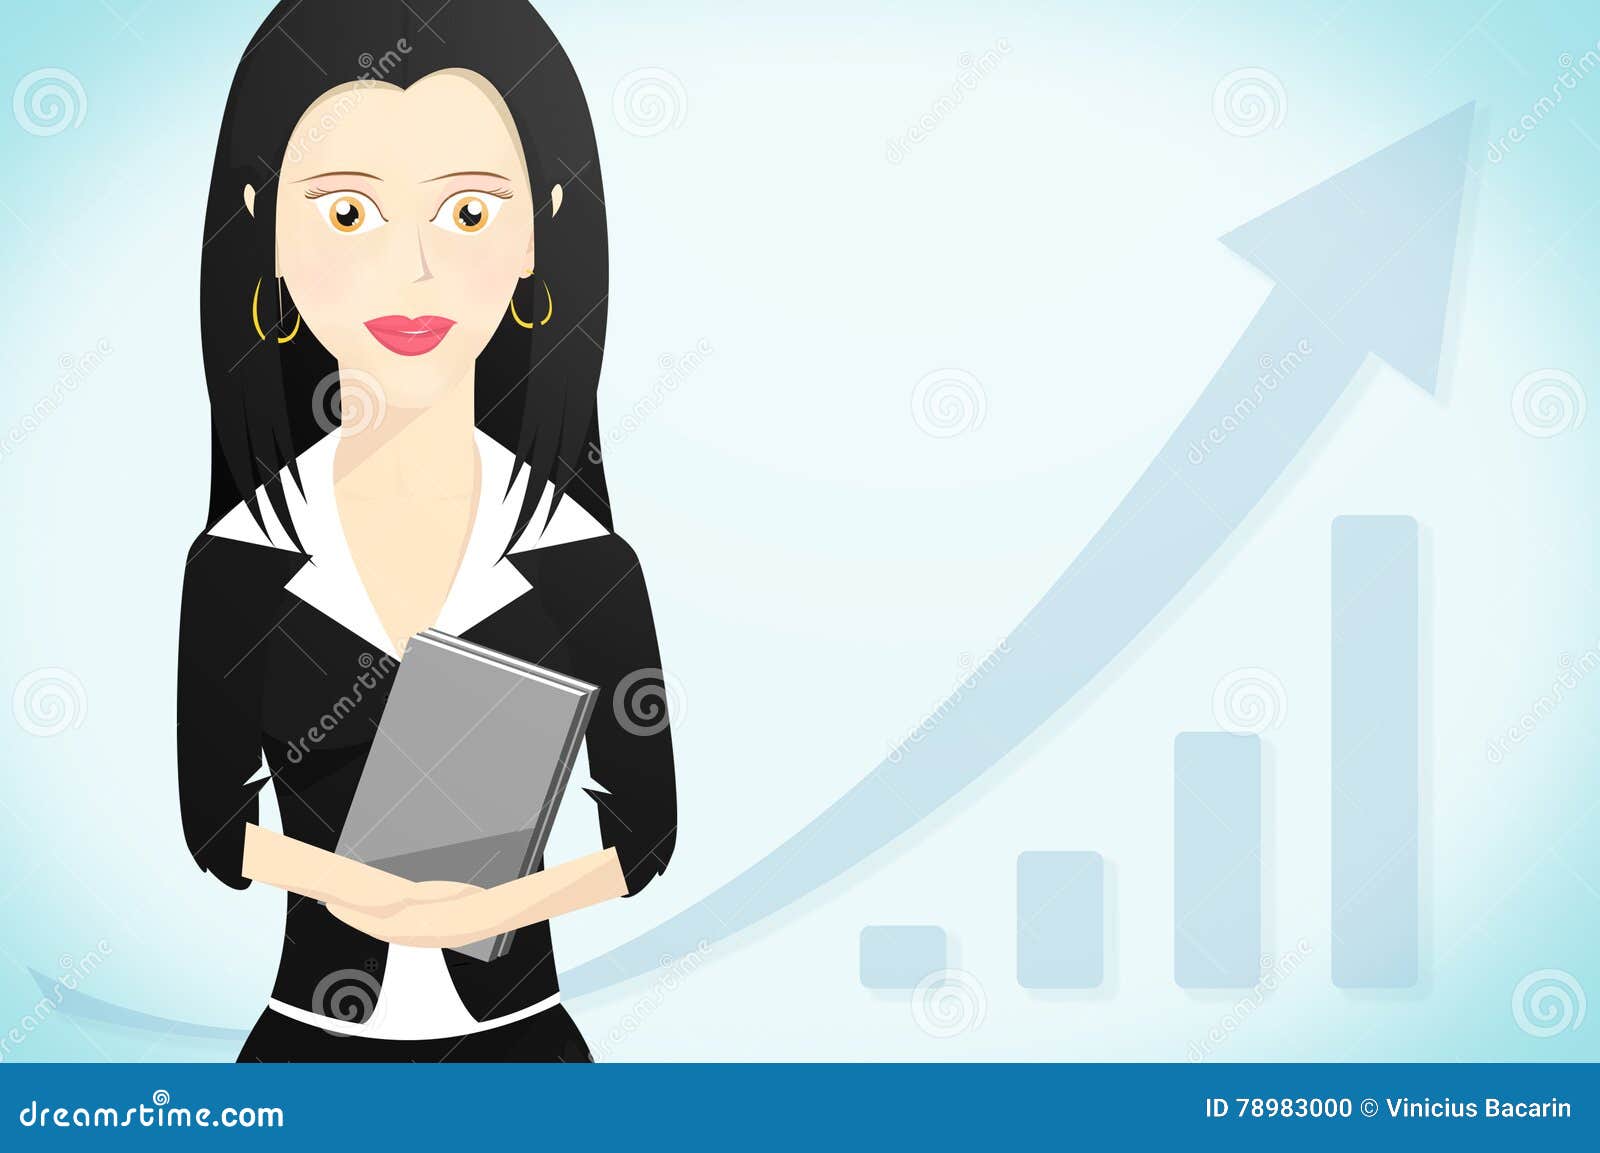 business woman character formally dressed and holding a book